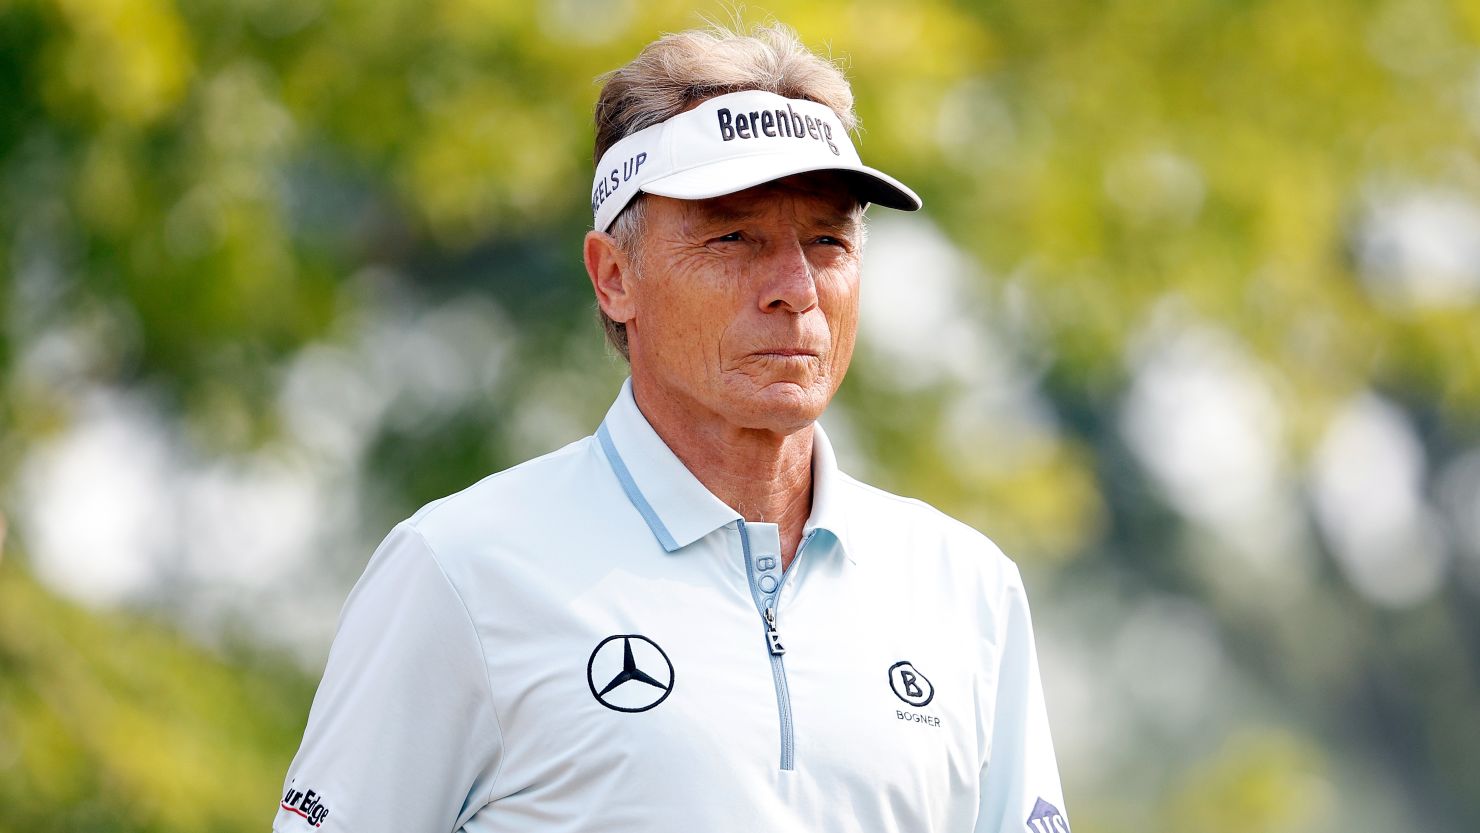 Germany's Bernhard Langer will miss this year's Masters through injury.